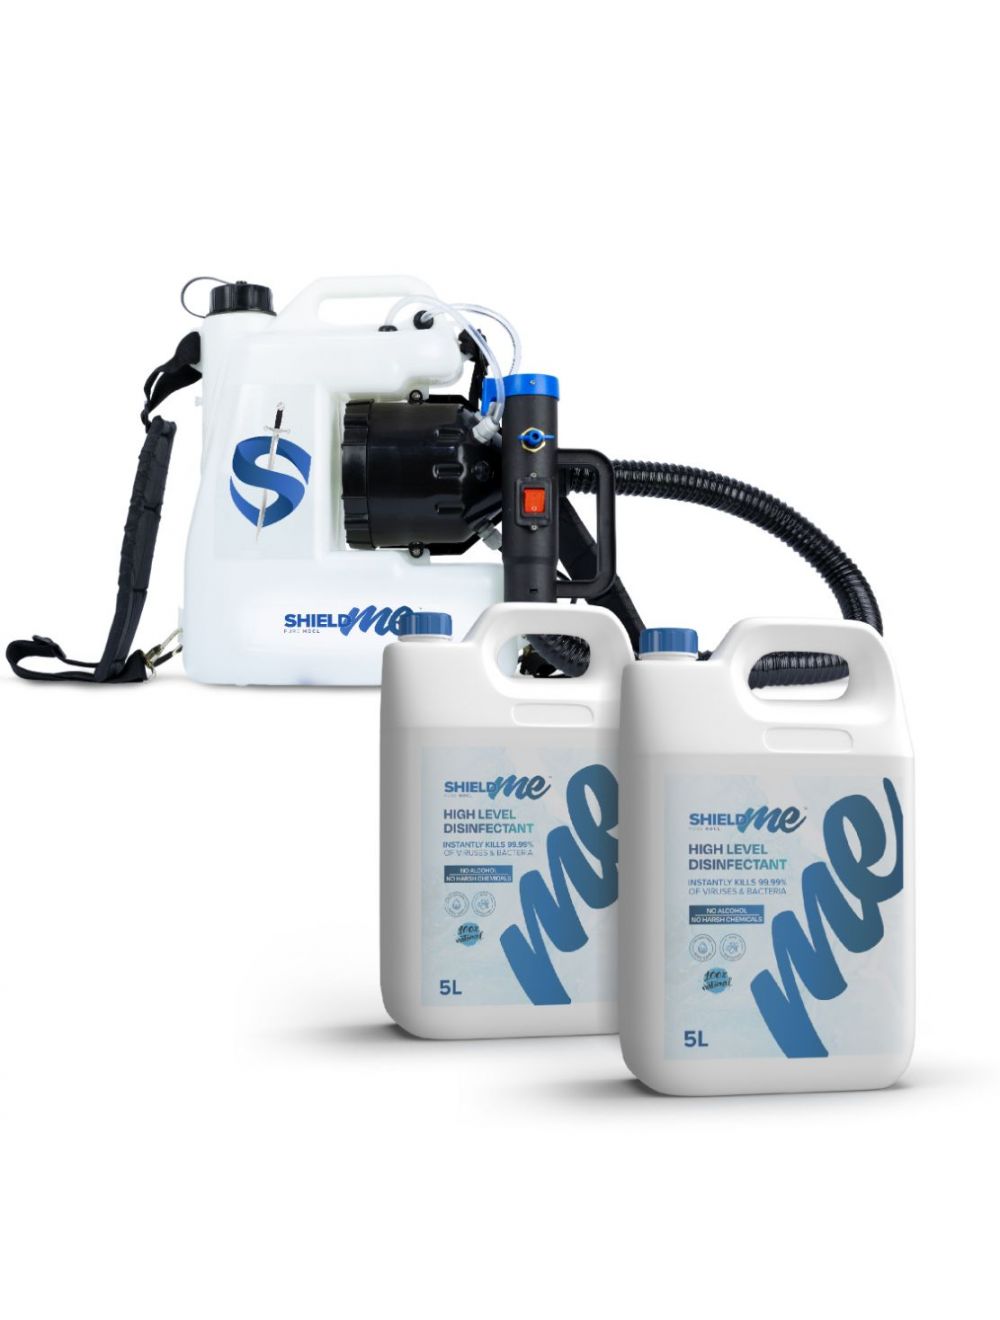 SHIELDme Disinfection Fogging Spray Machine12 Litres Capacity & 10 Litres High Level Disinfectant 100% Natural-UV-ITC2-RVCX